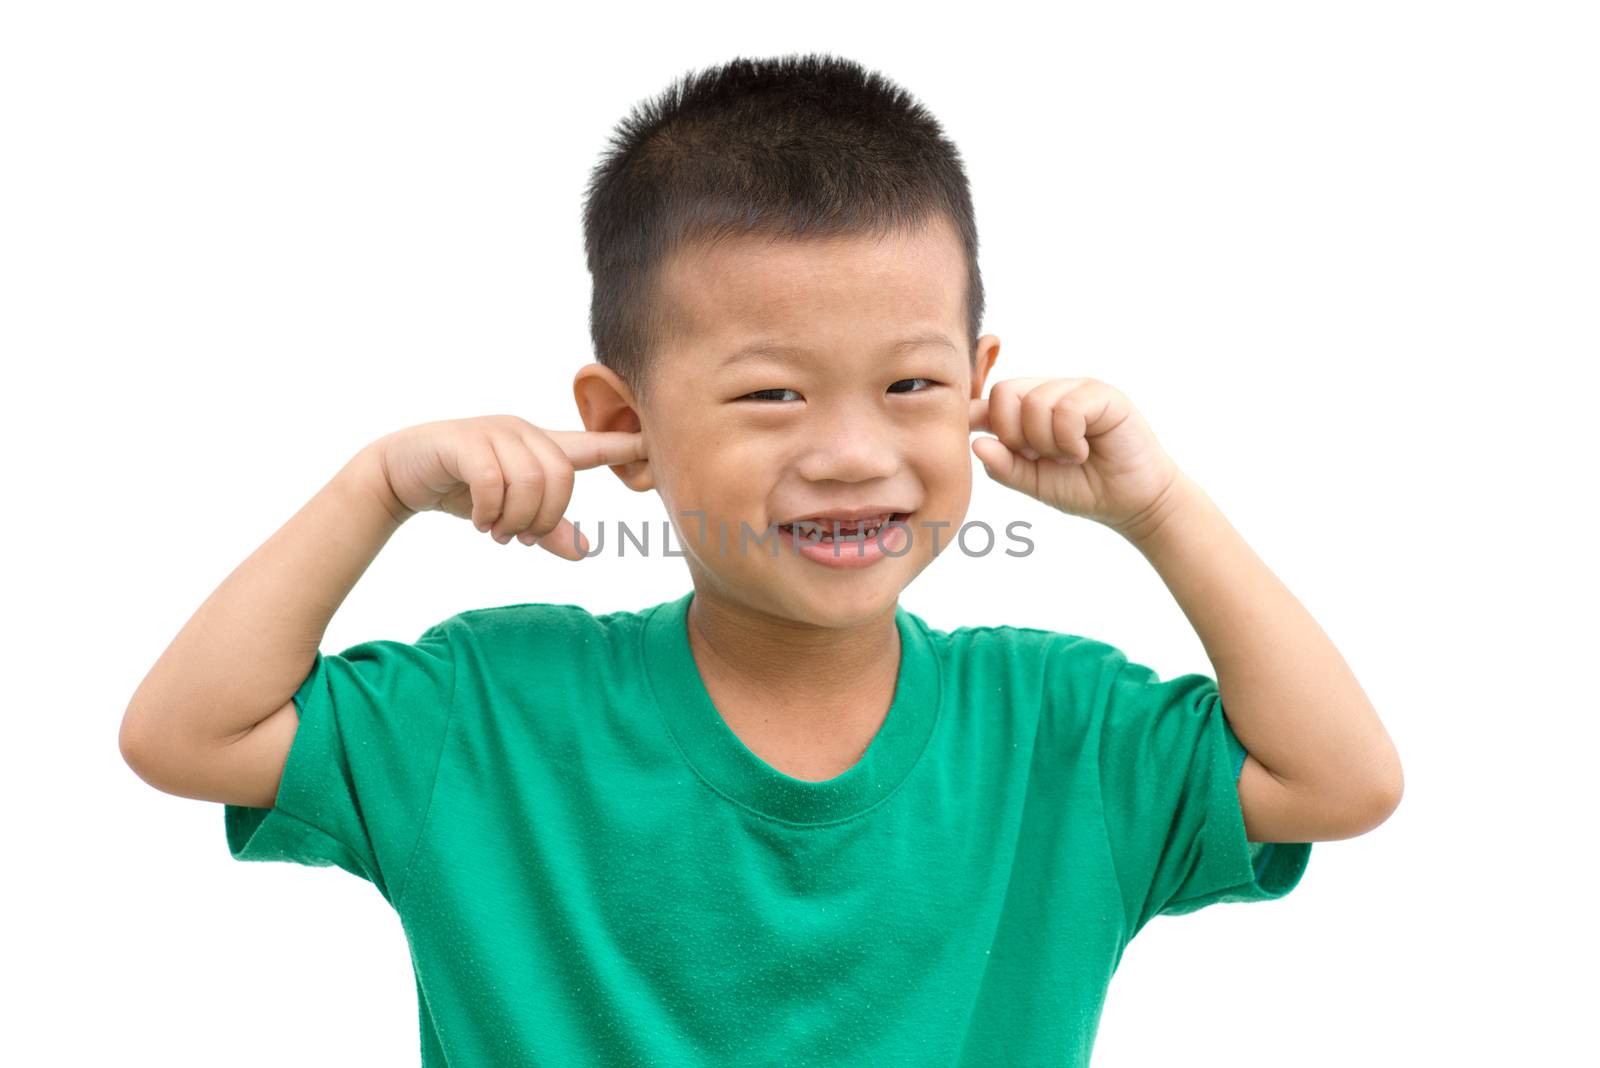 Asian child smiling and covering ears with hands. Portrait of young boy isolated on white background.